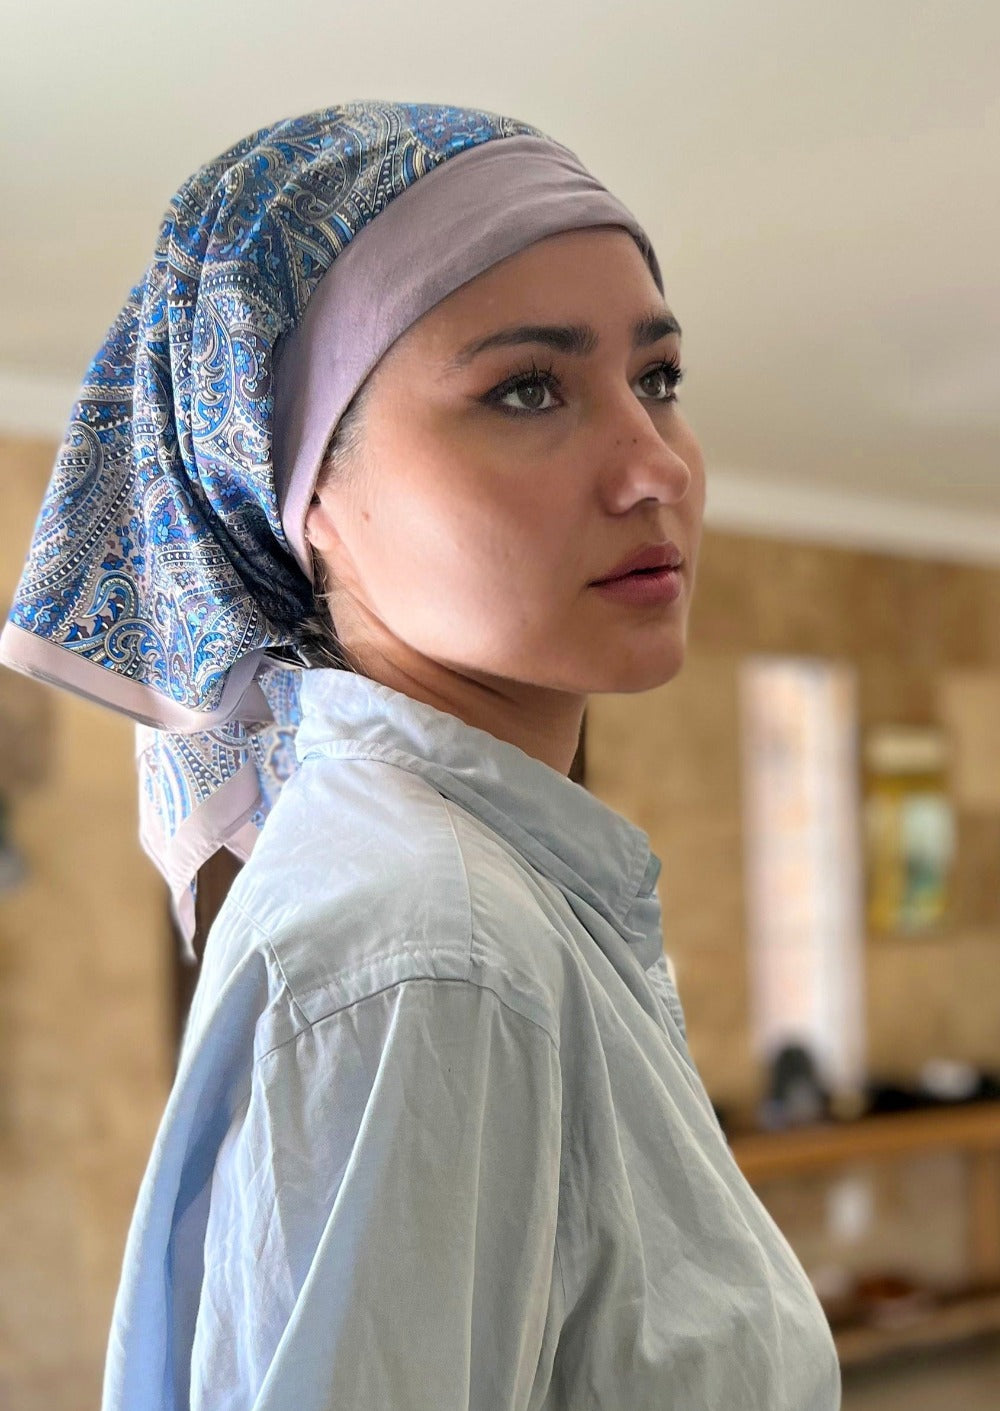 A beautiful woman, wearing a light jean shirt stand smiling in her kitchen. She wears a headscarf on her head, with A paisley pattern of lavender with hints of blue, on a custom printed scarf, It has an organic cotton base in the same calming lavender col